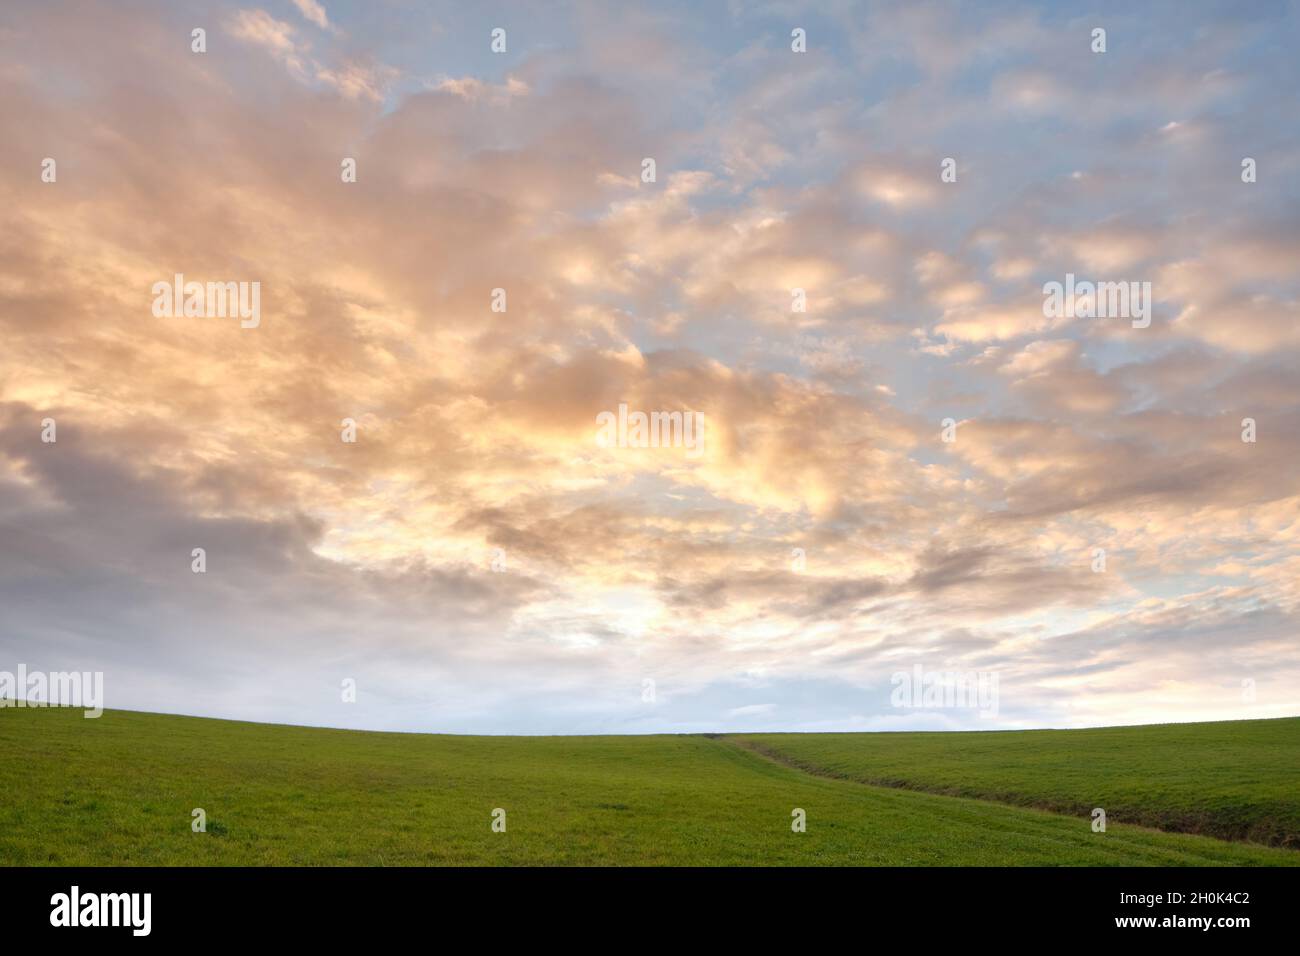 Beautiful sunset sky with clouds above horizon of a green meadow on agricultural field. Seen in Germany in October. Stock Photo